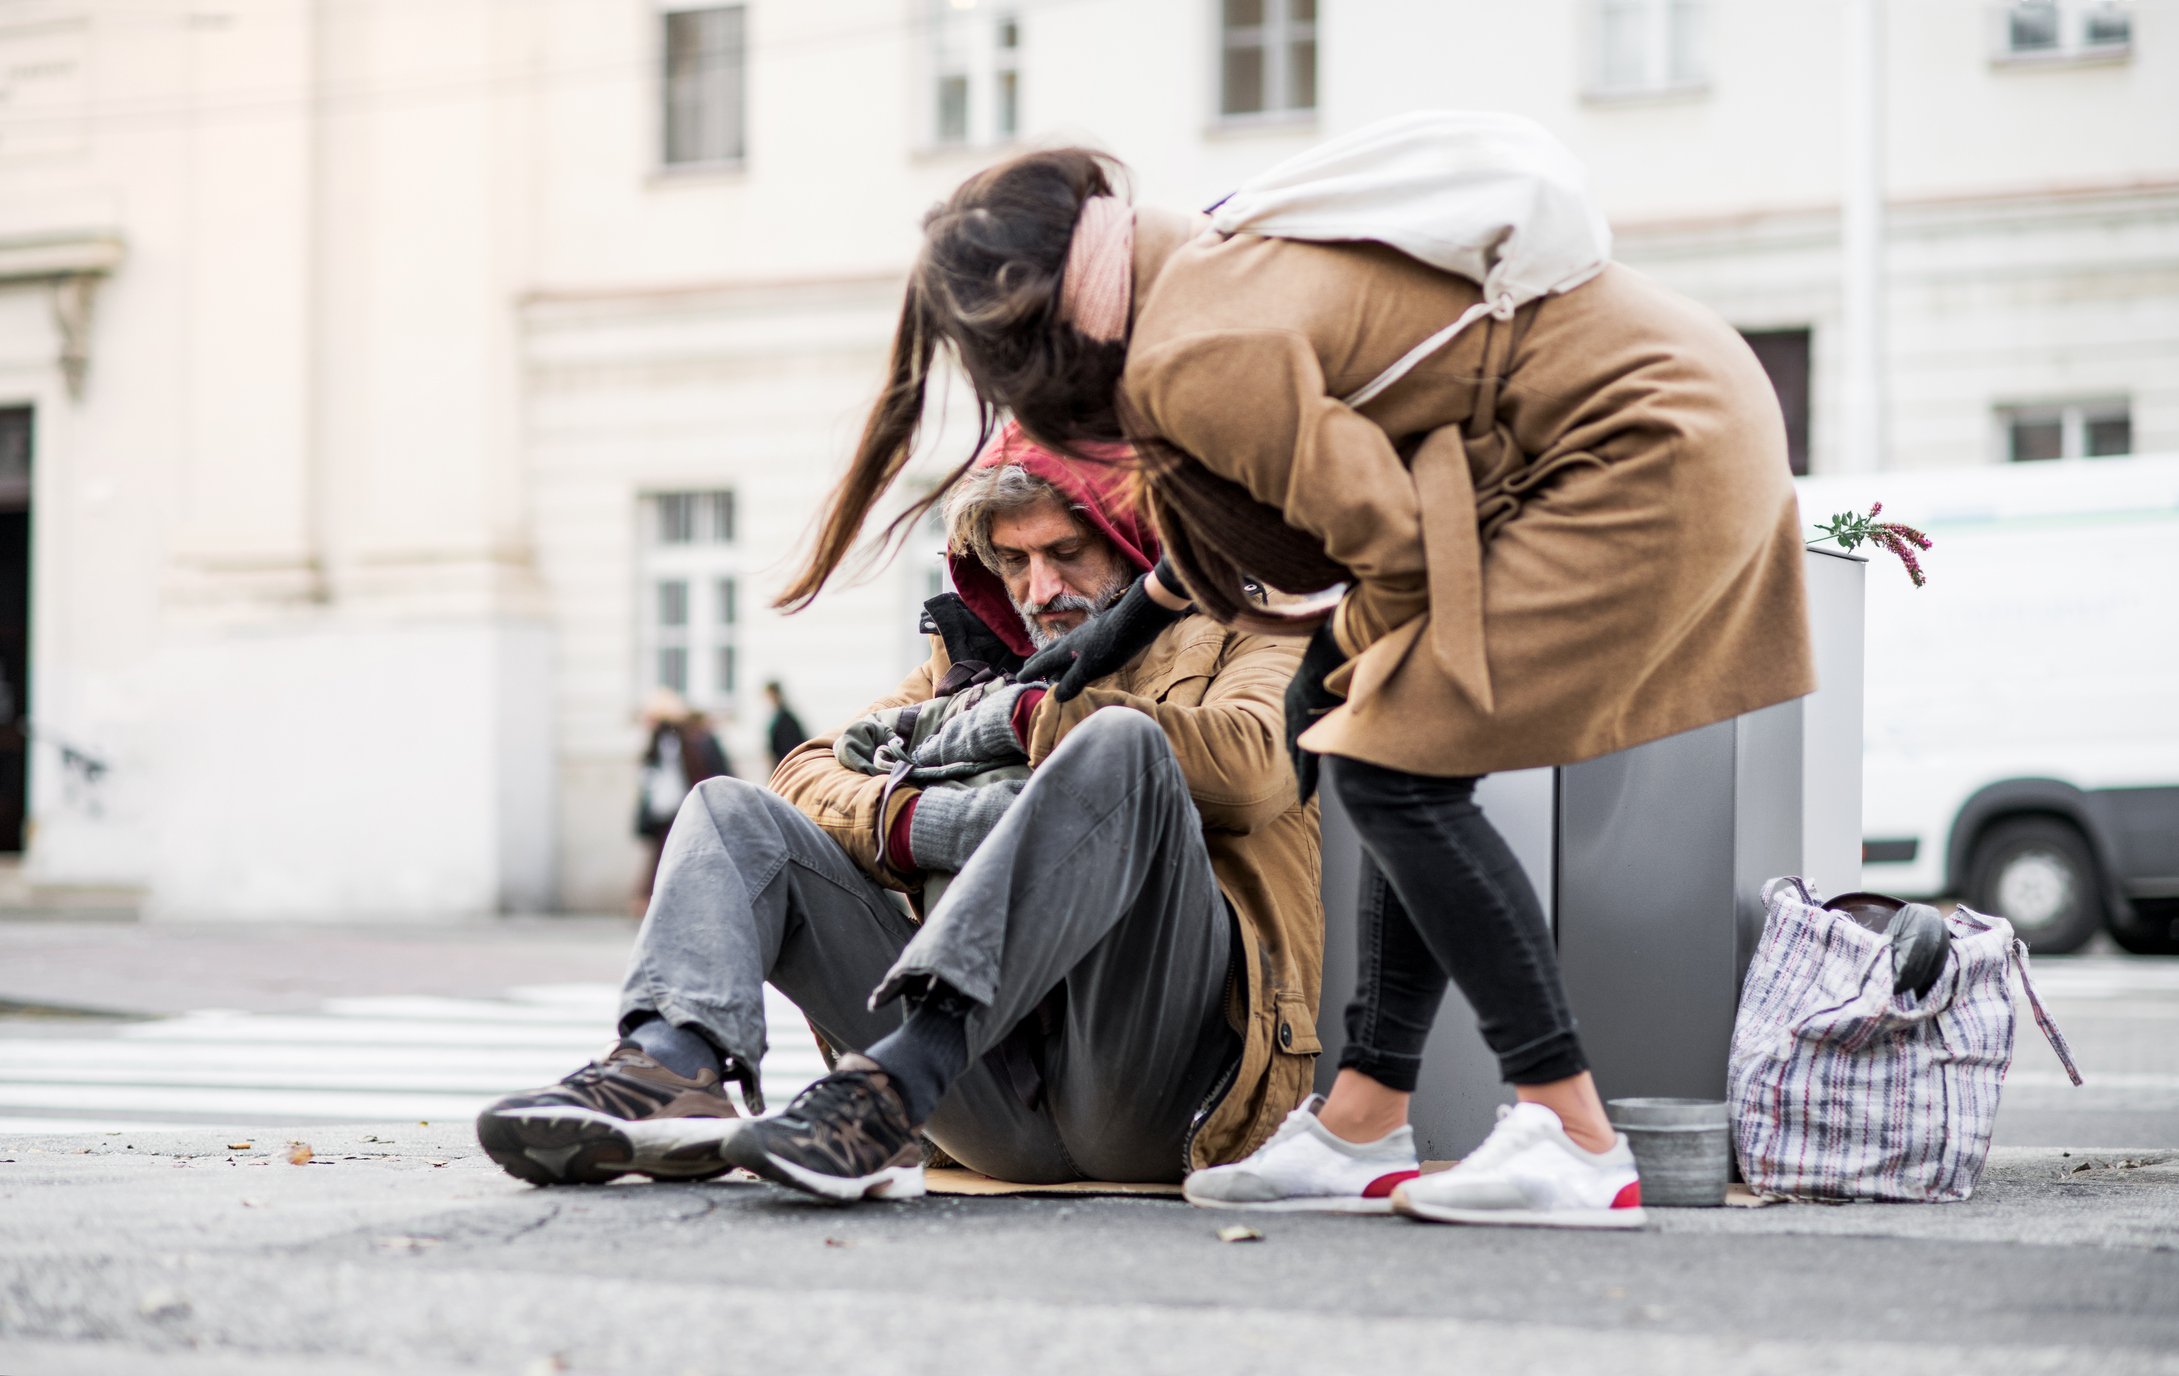 How You Can Help the Homeless During the Coronavirus Pandemic